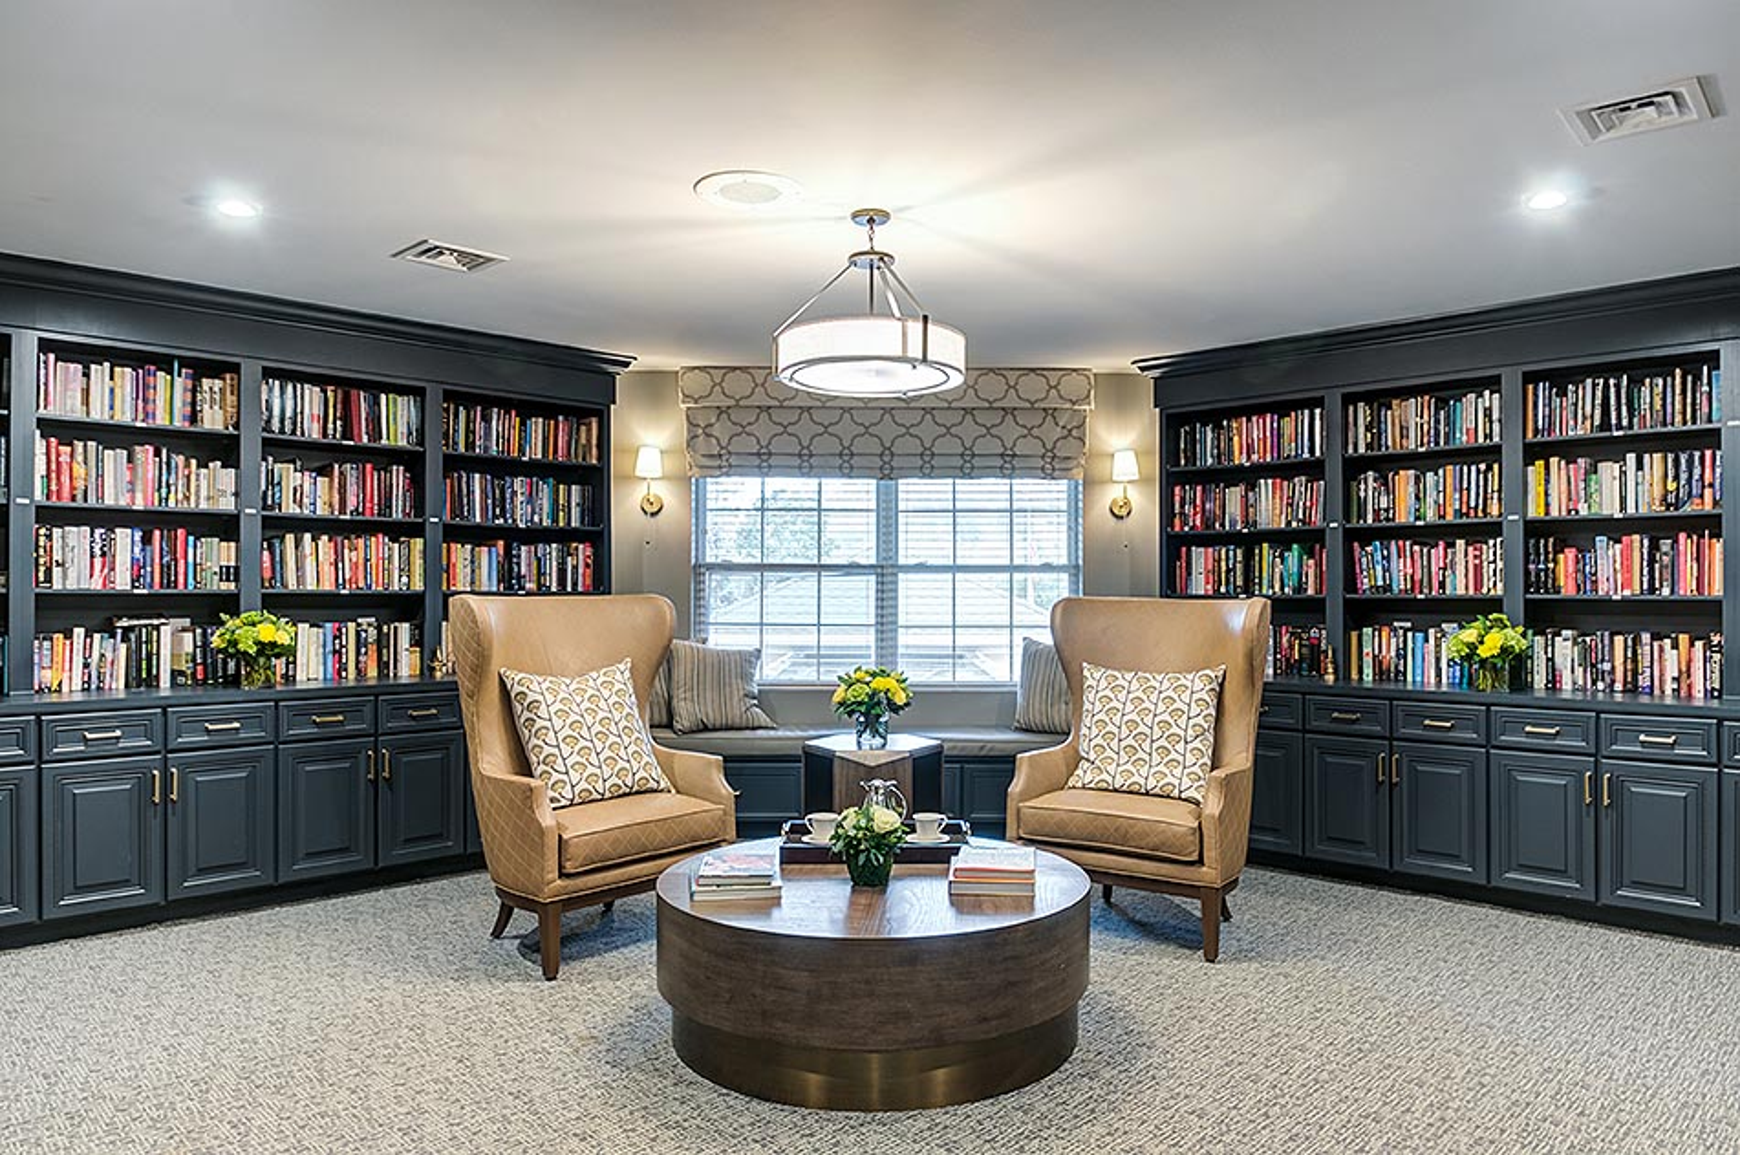 Library with built ins filled with wide selection of books and comfortable seating